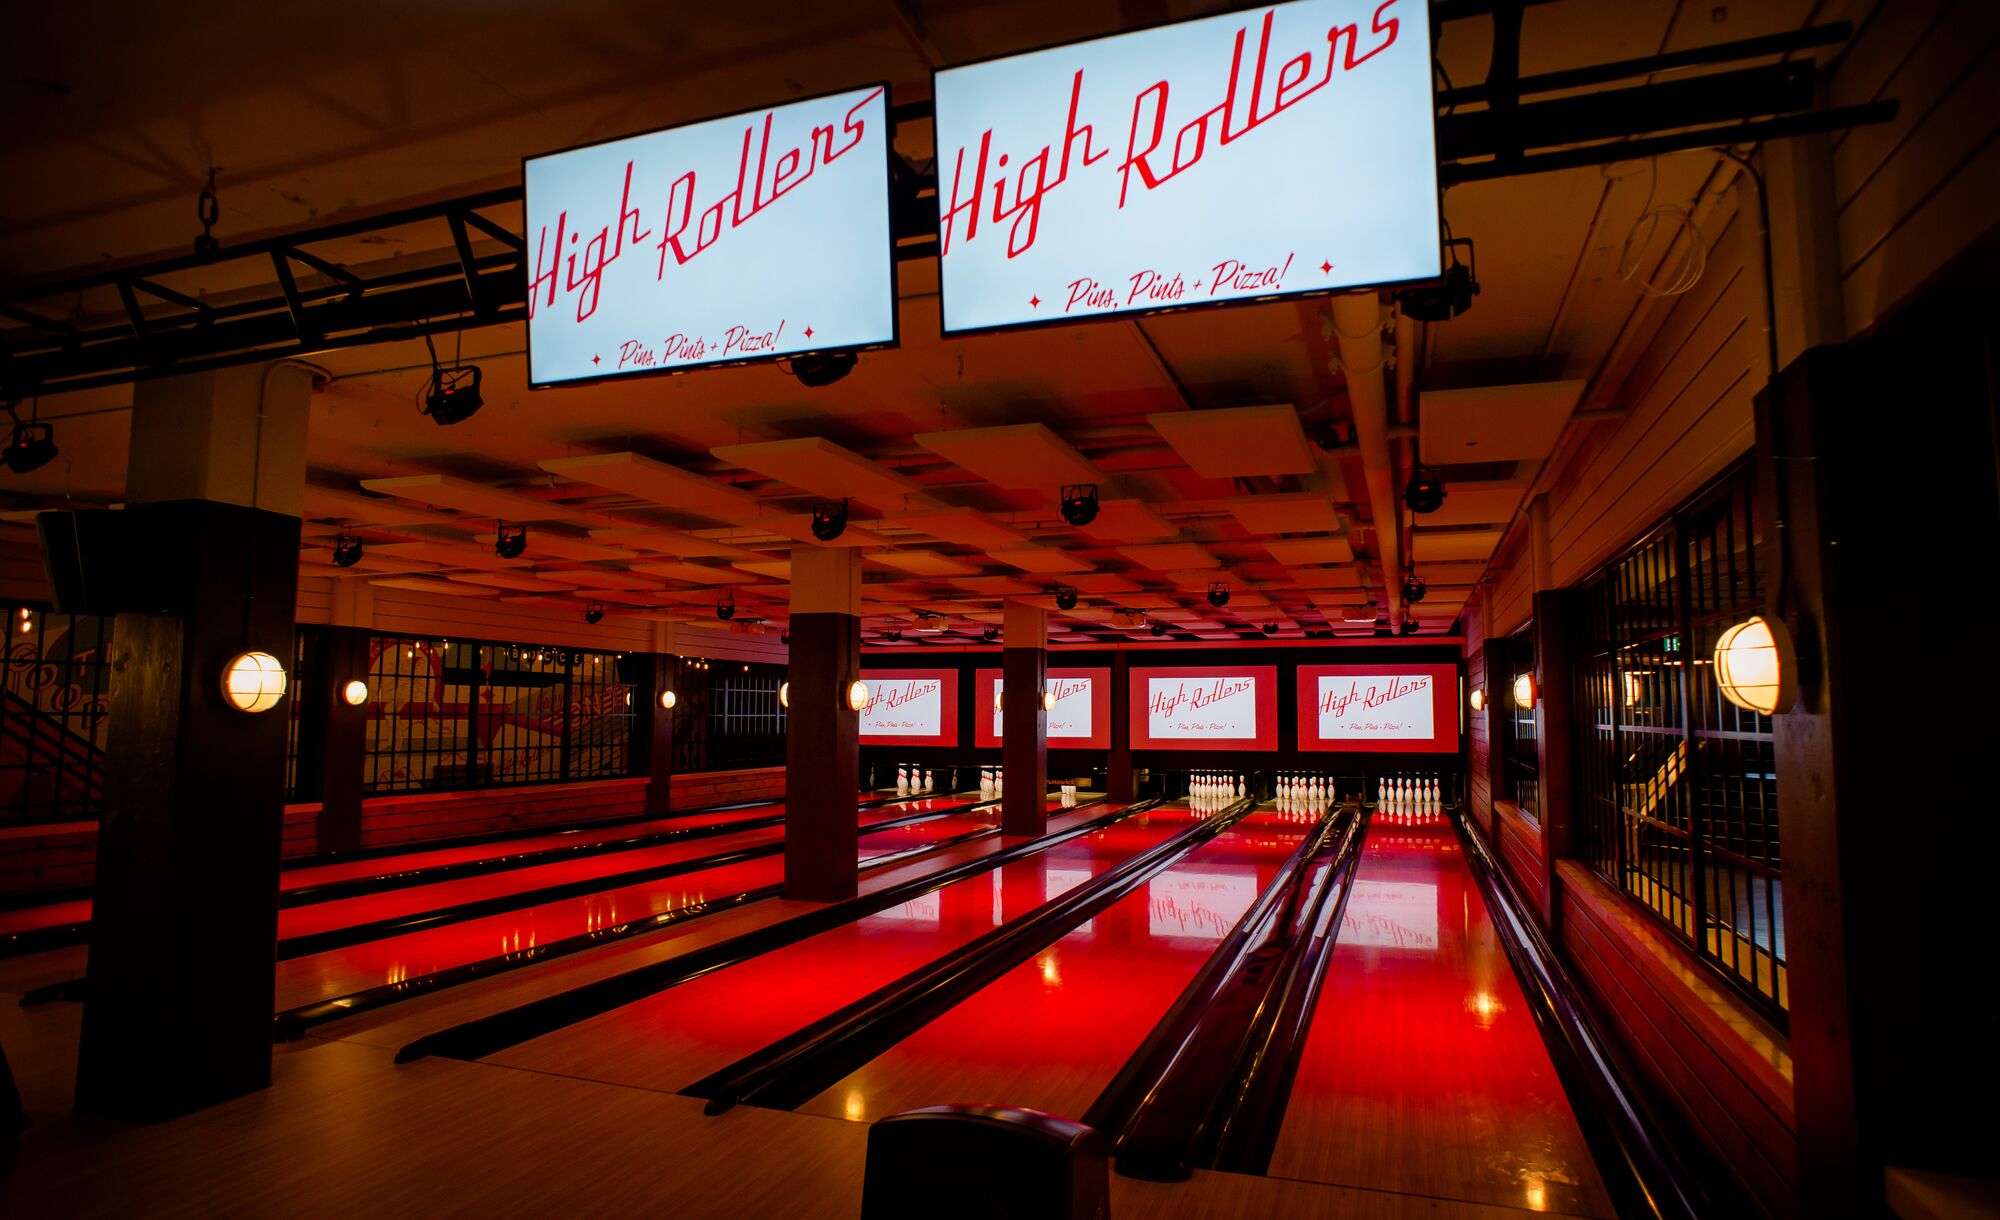 The bowling lanes at High Rollers in Banff, illuminated in red, in Banff National Park.